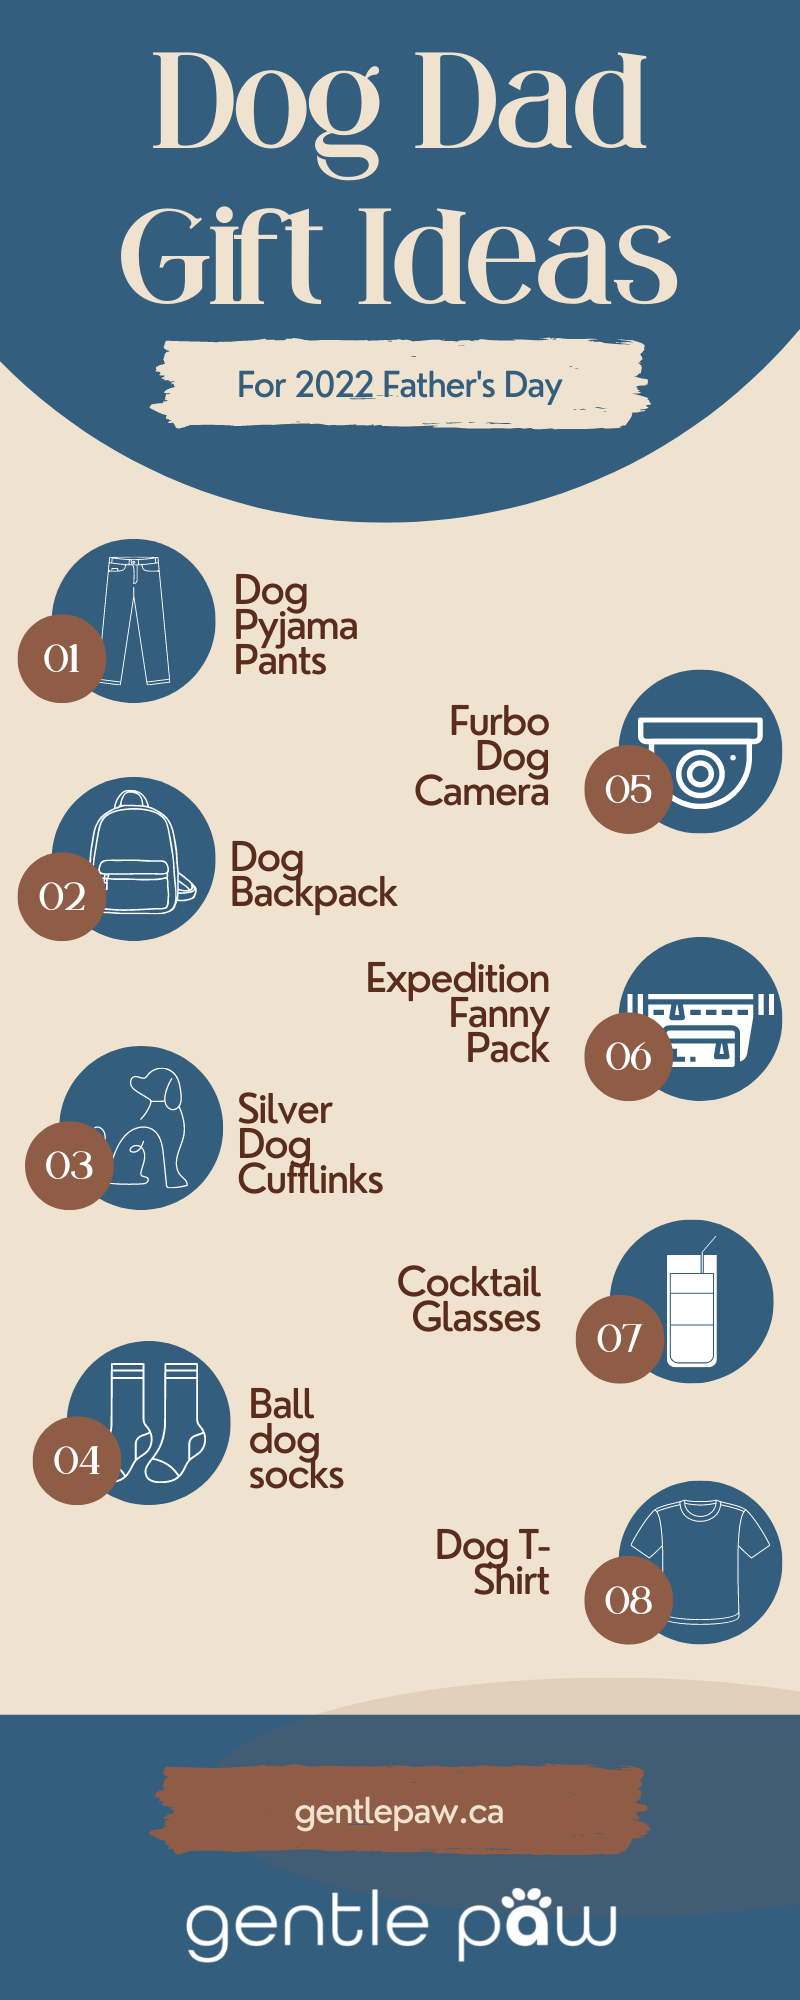 Dog Dad Gift Ideas For 2022 Father's Day Infographic